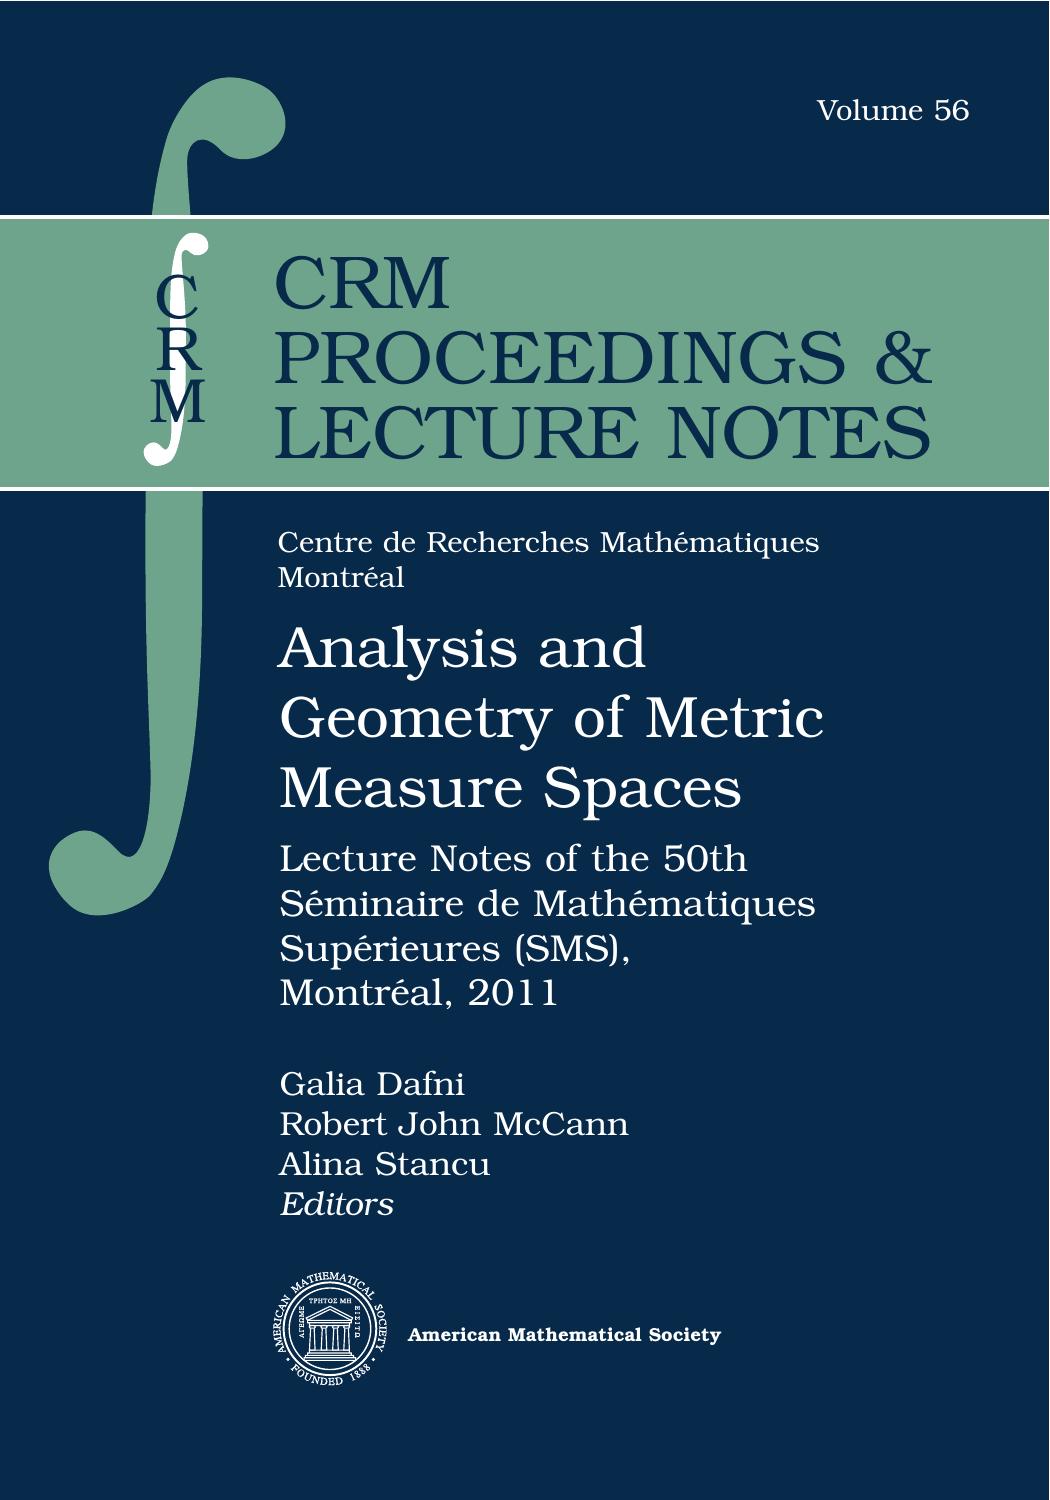 CRM Proceedings and Lecture Notes